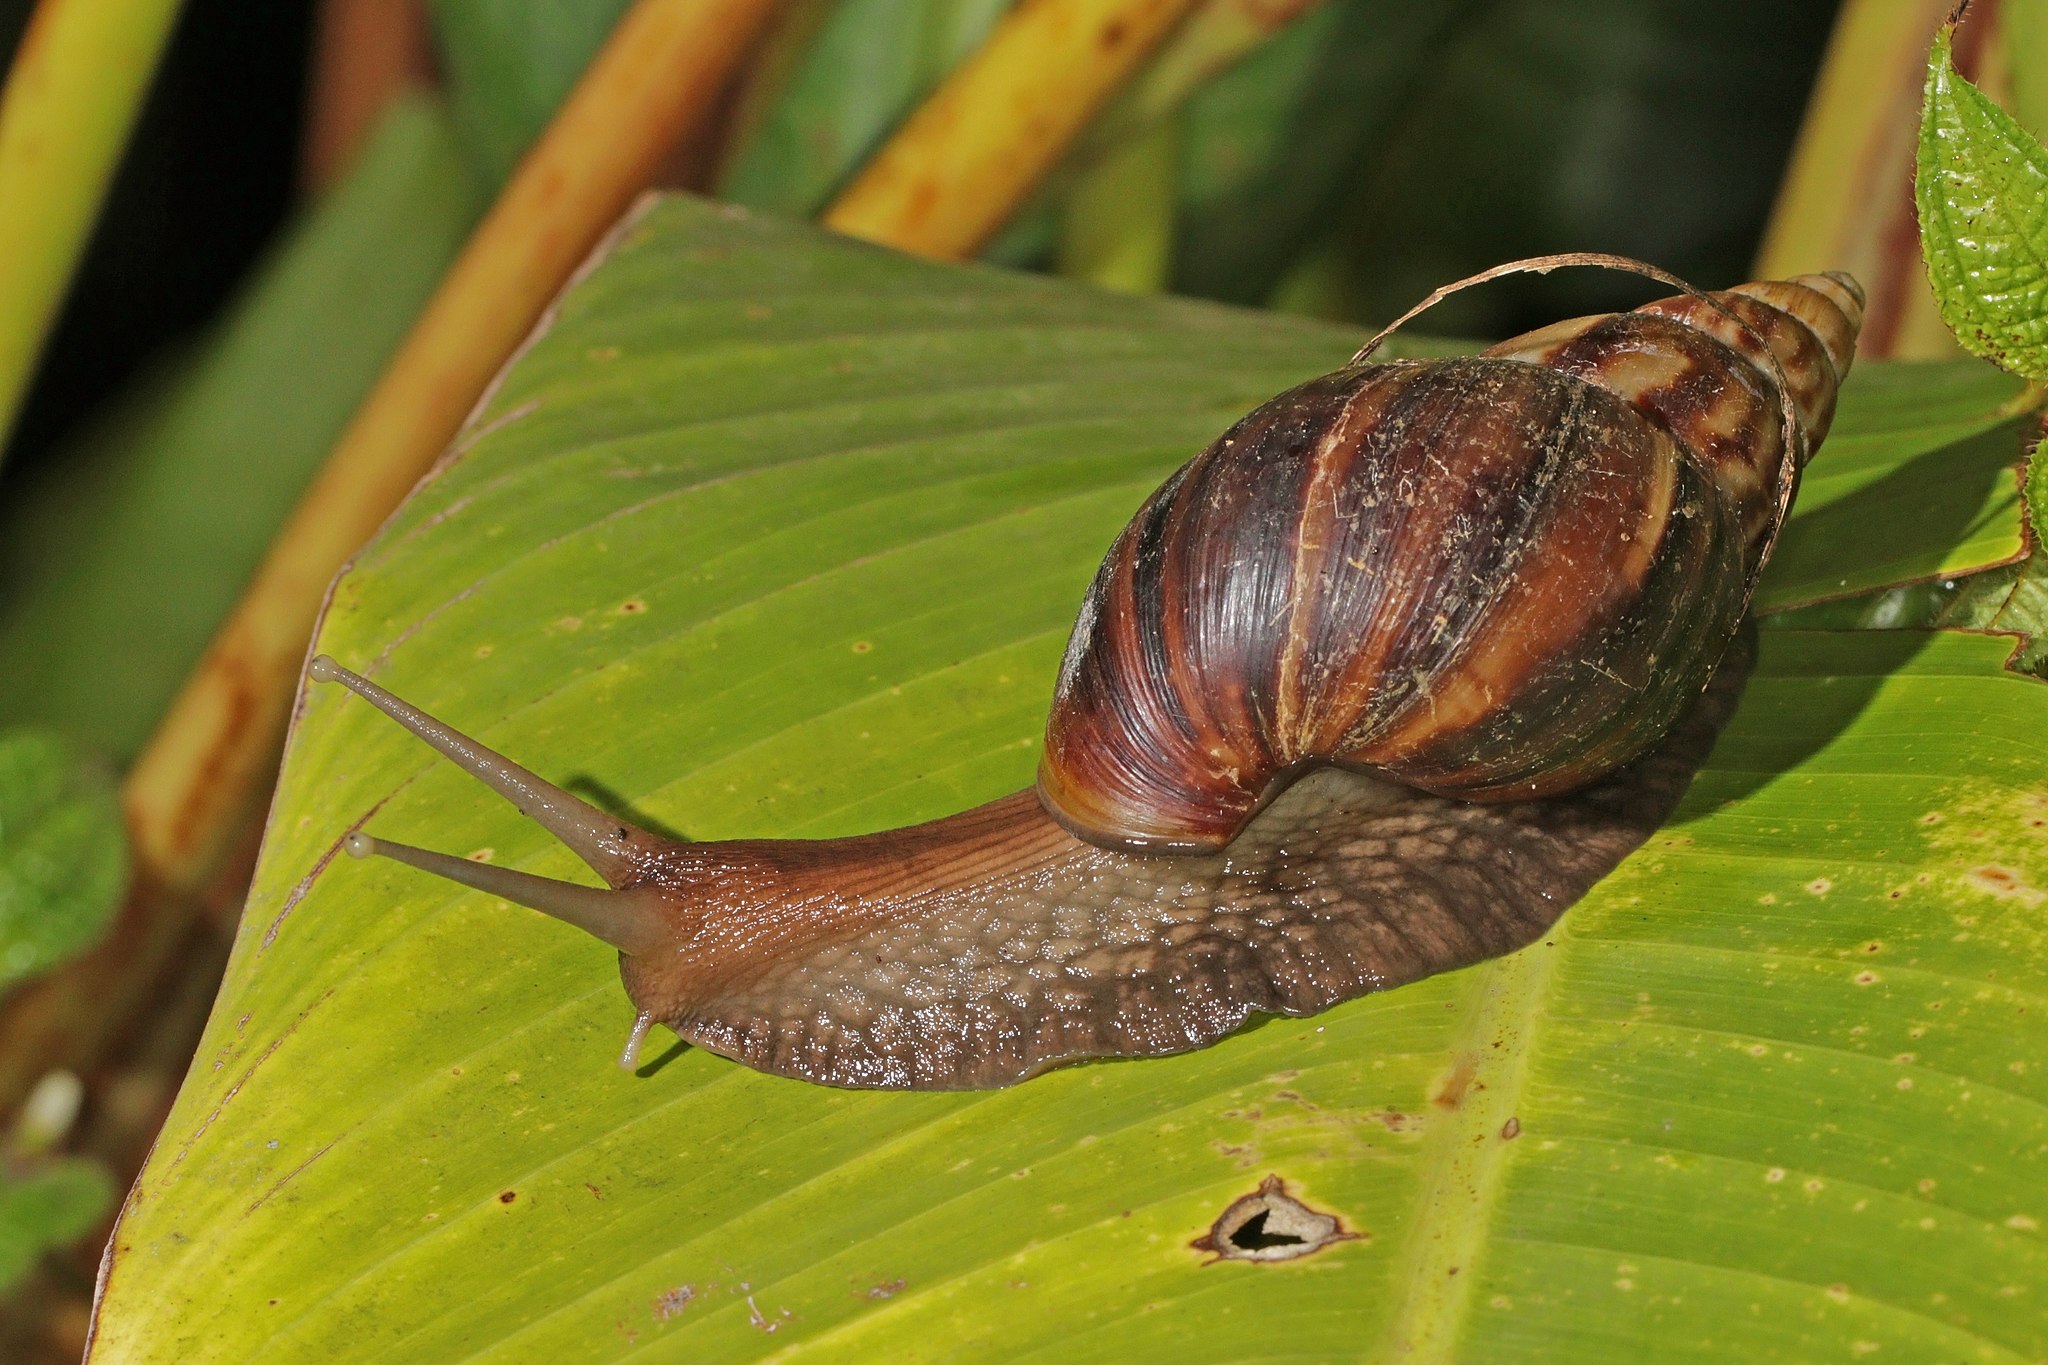 Giant African Land Snails Invasive Species in Florida